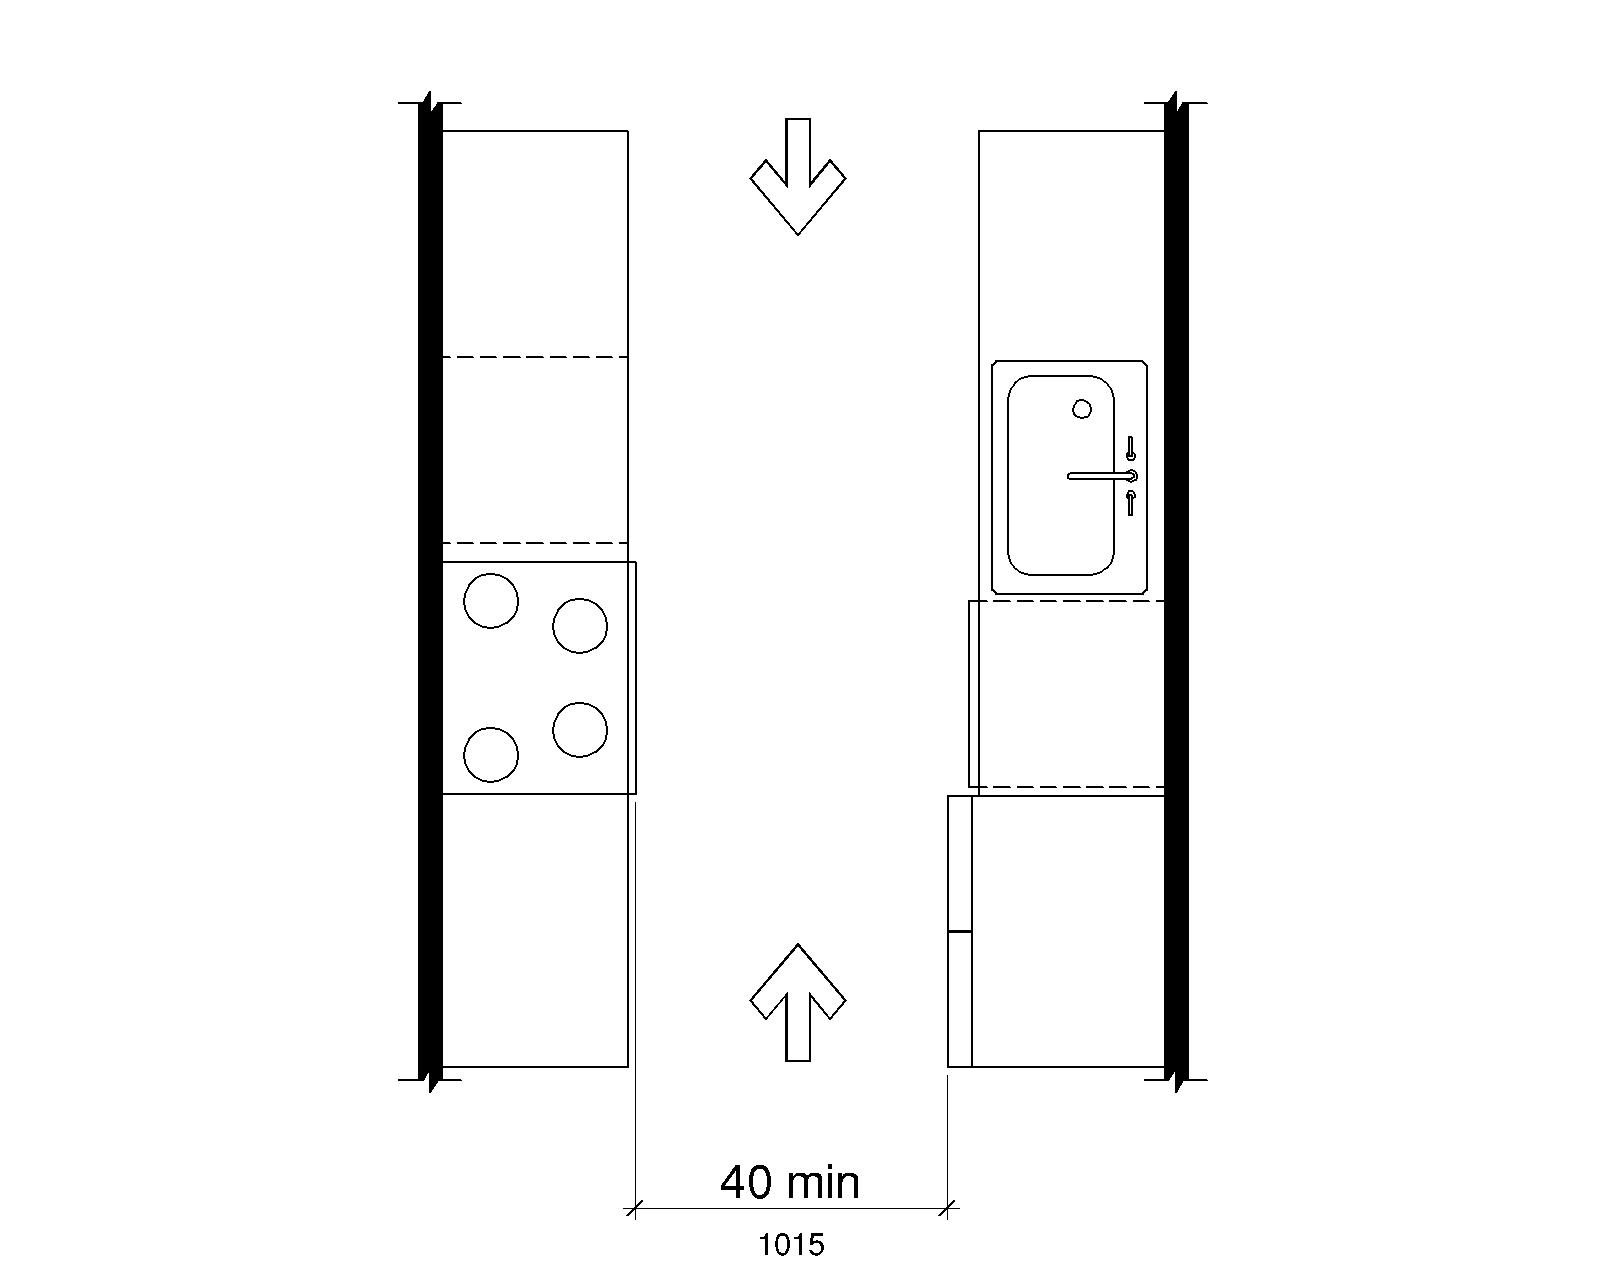 A plan view of a galley with appliances and cabinets on both sides of an aisle open on both ends shows the width of the central aisle as 40 inches (1015 mm) minimum.